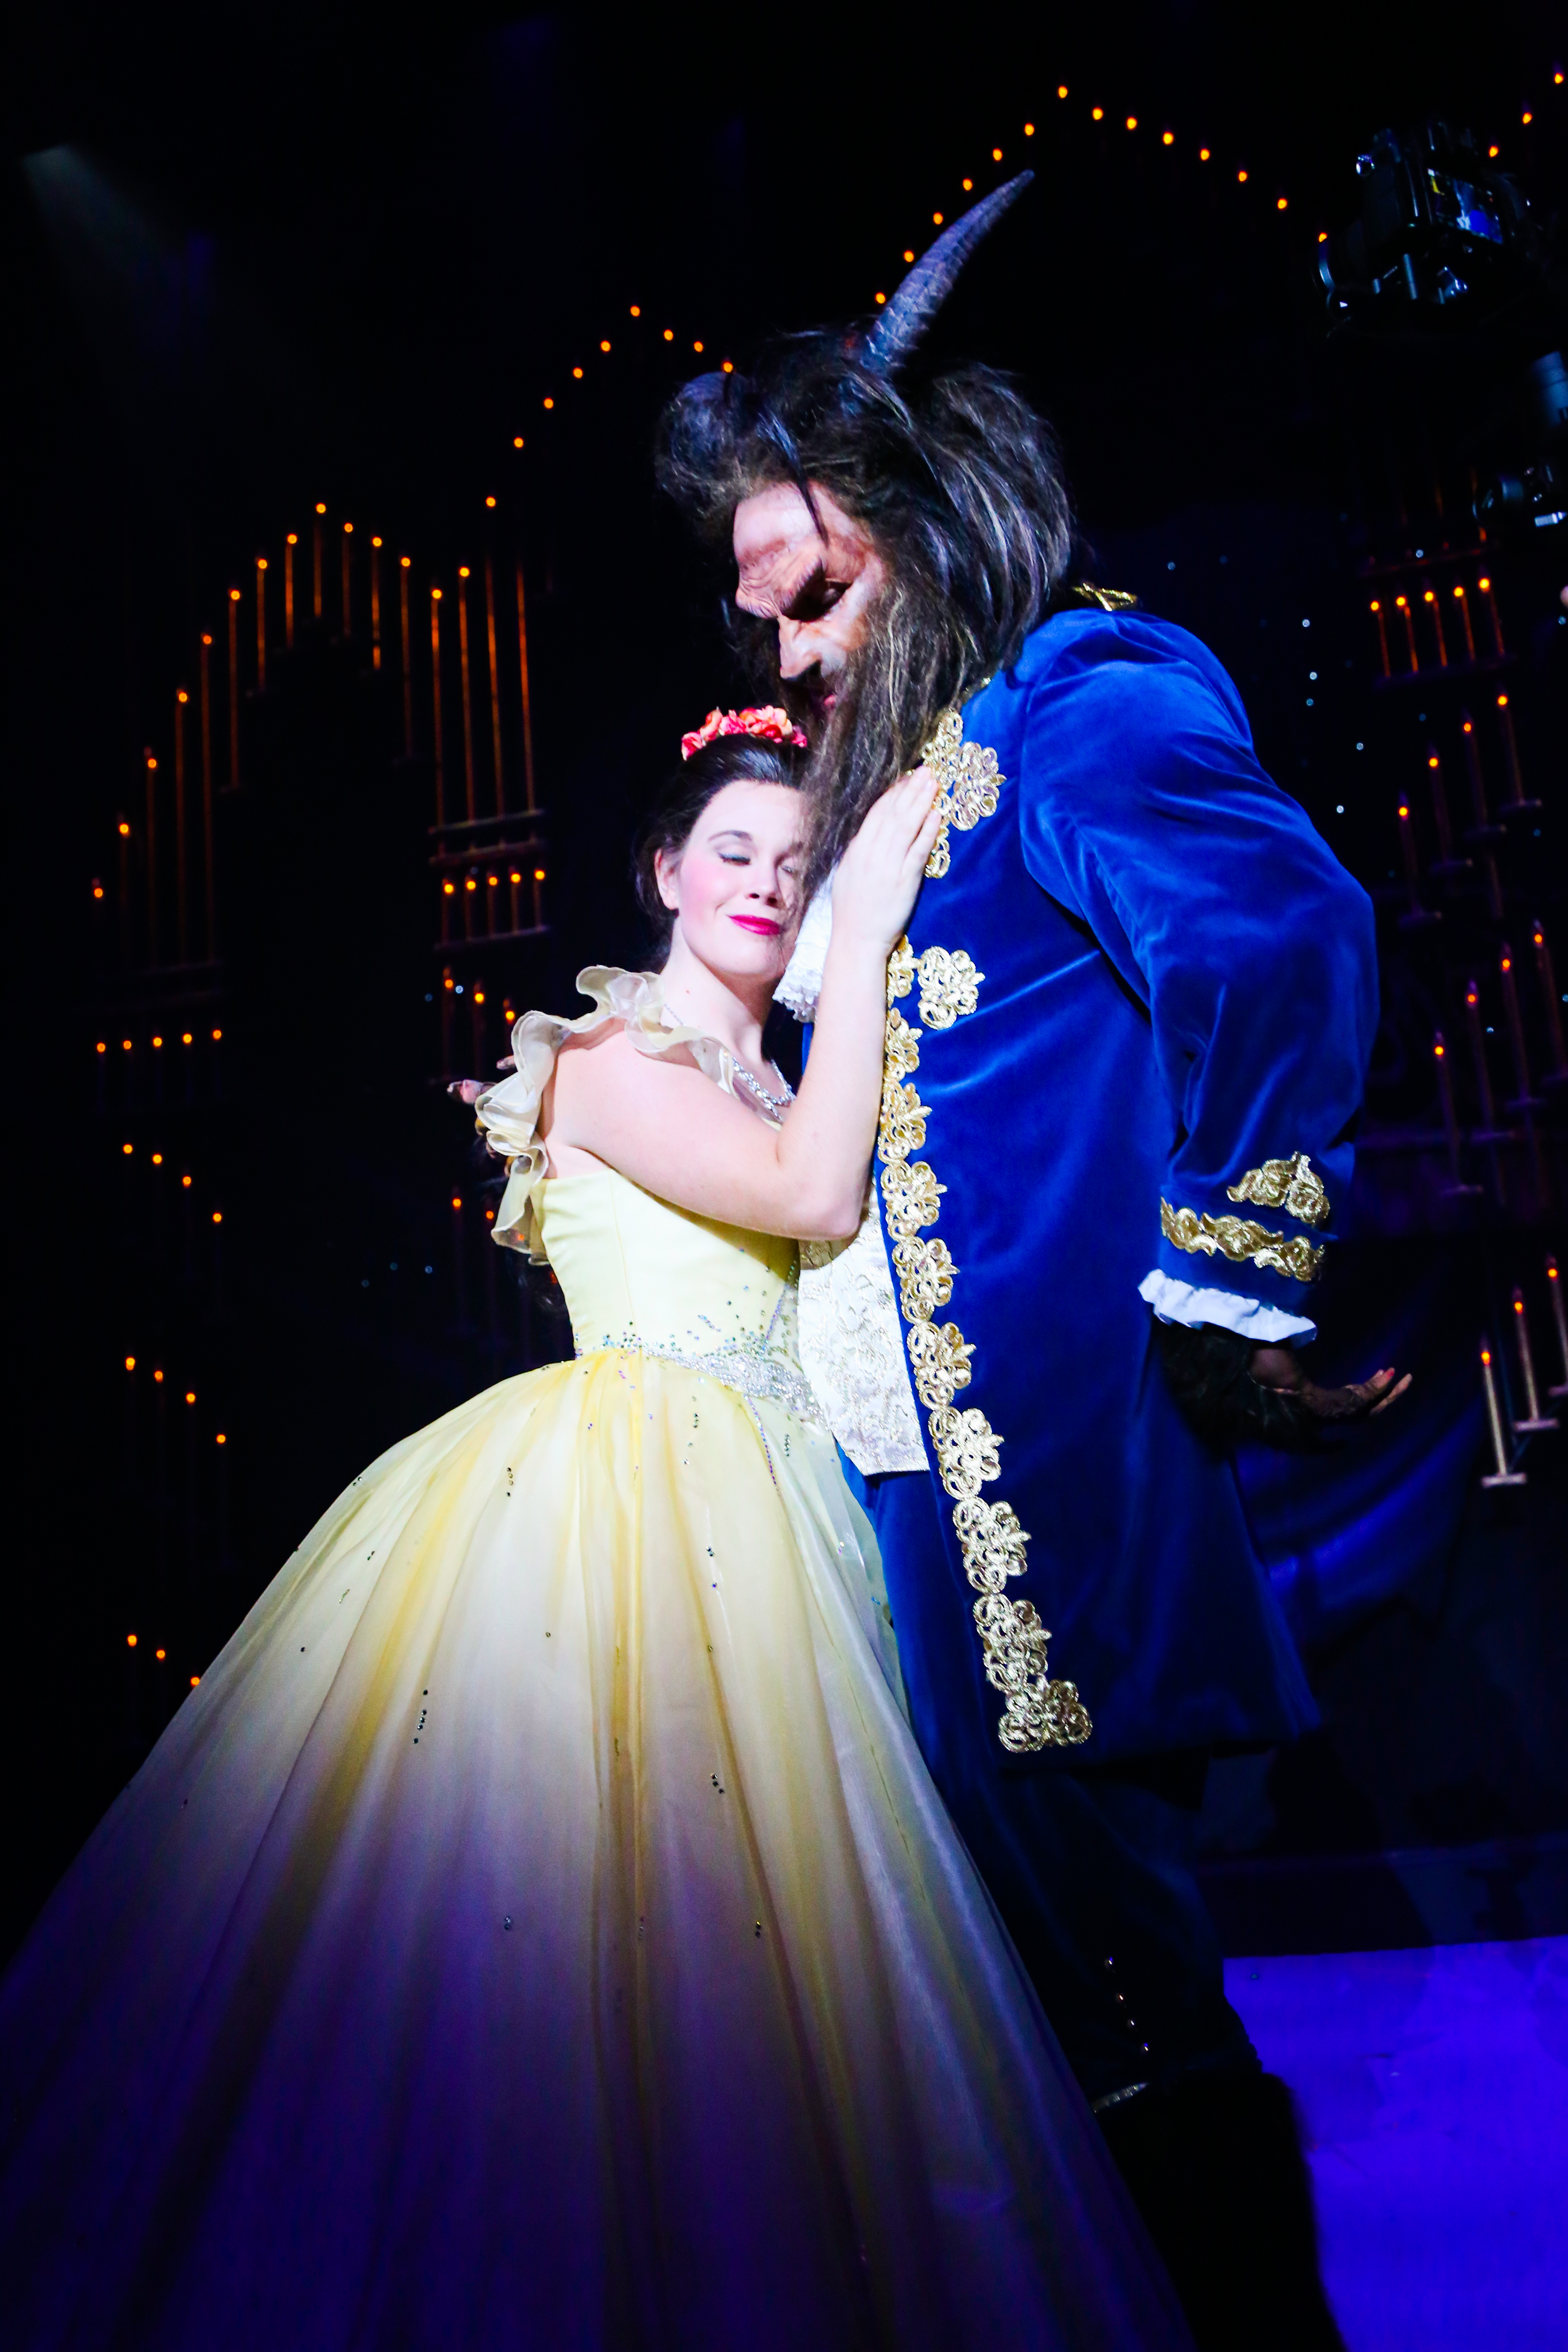 2-Beauty and the Beast - photo by Zak Bennett